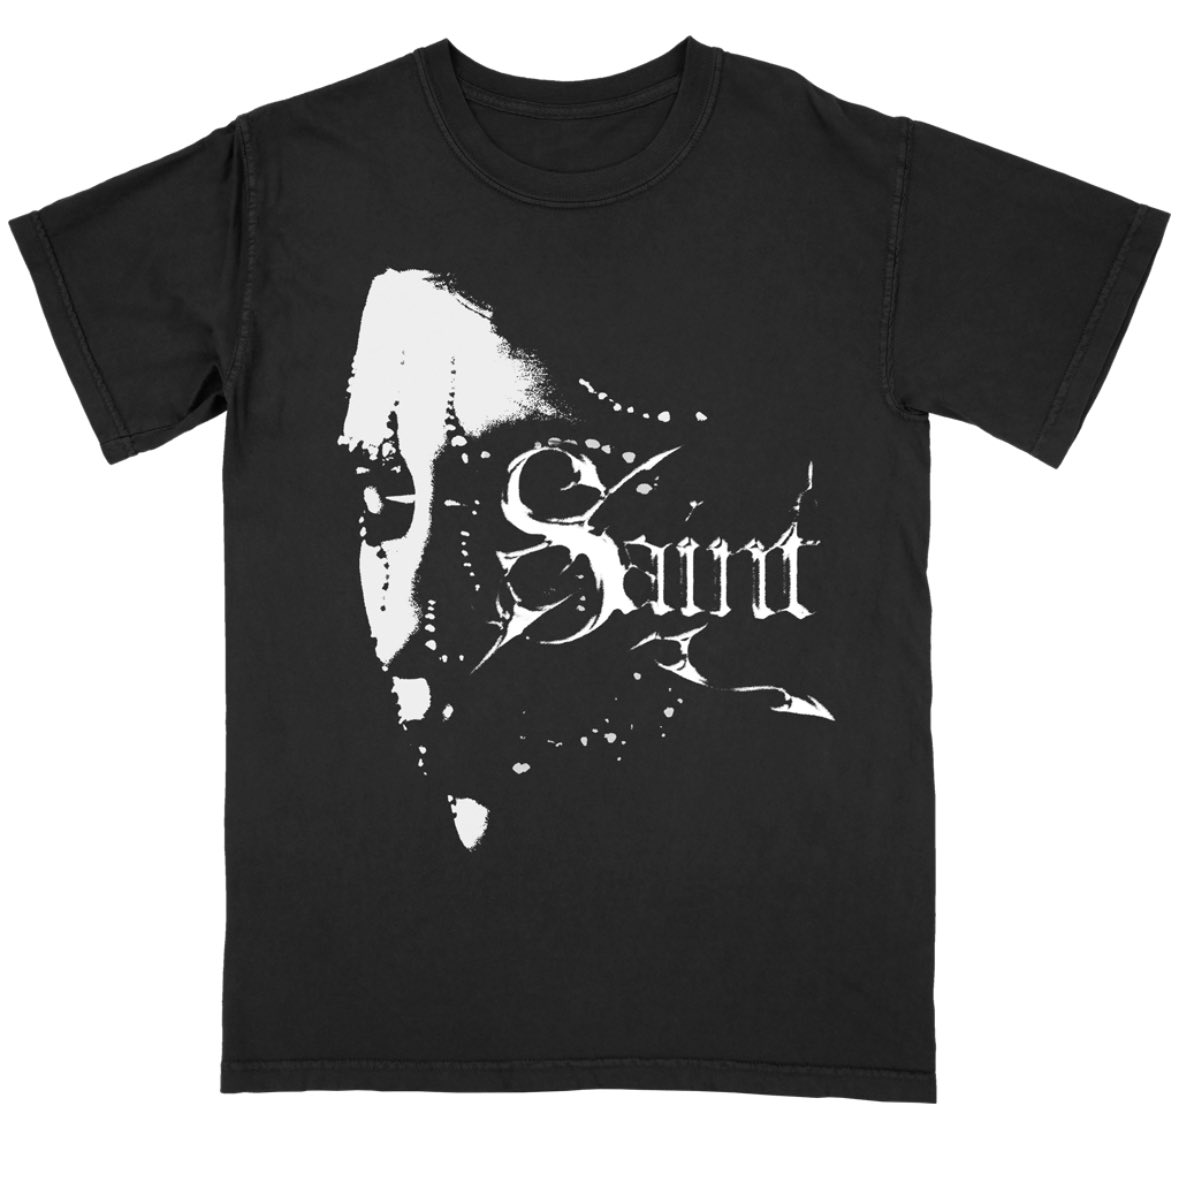 My new single SAINT is dropping tomorrow 9/29 and I just launched my first official merch #teamdeath hellomerch.com/collections/de…